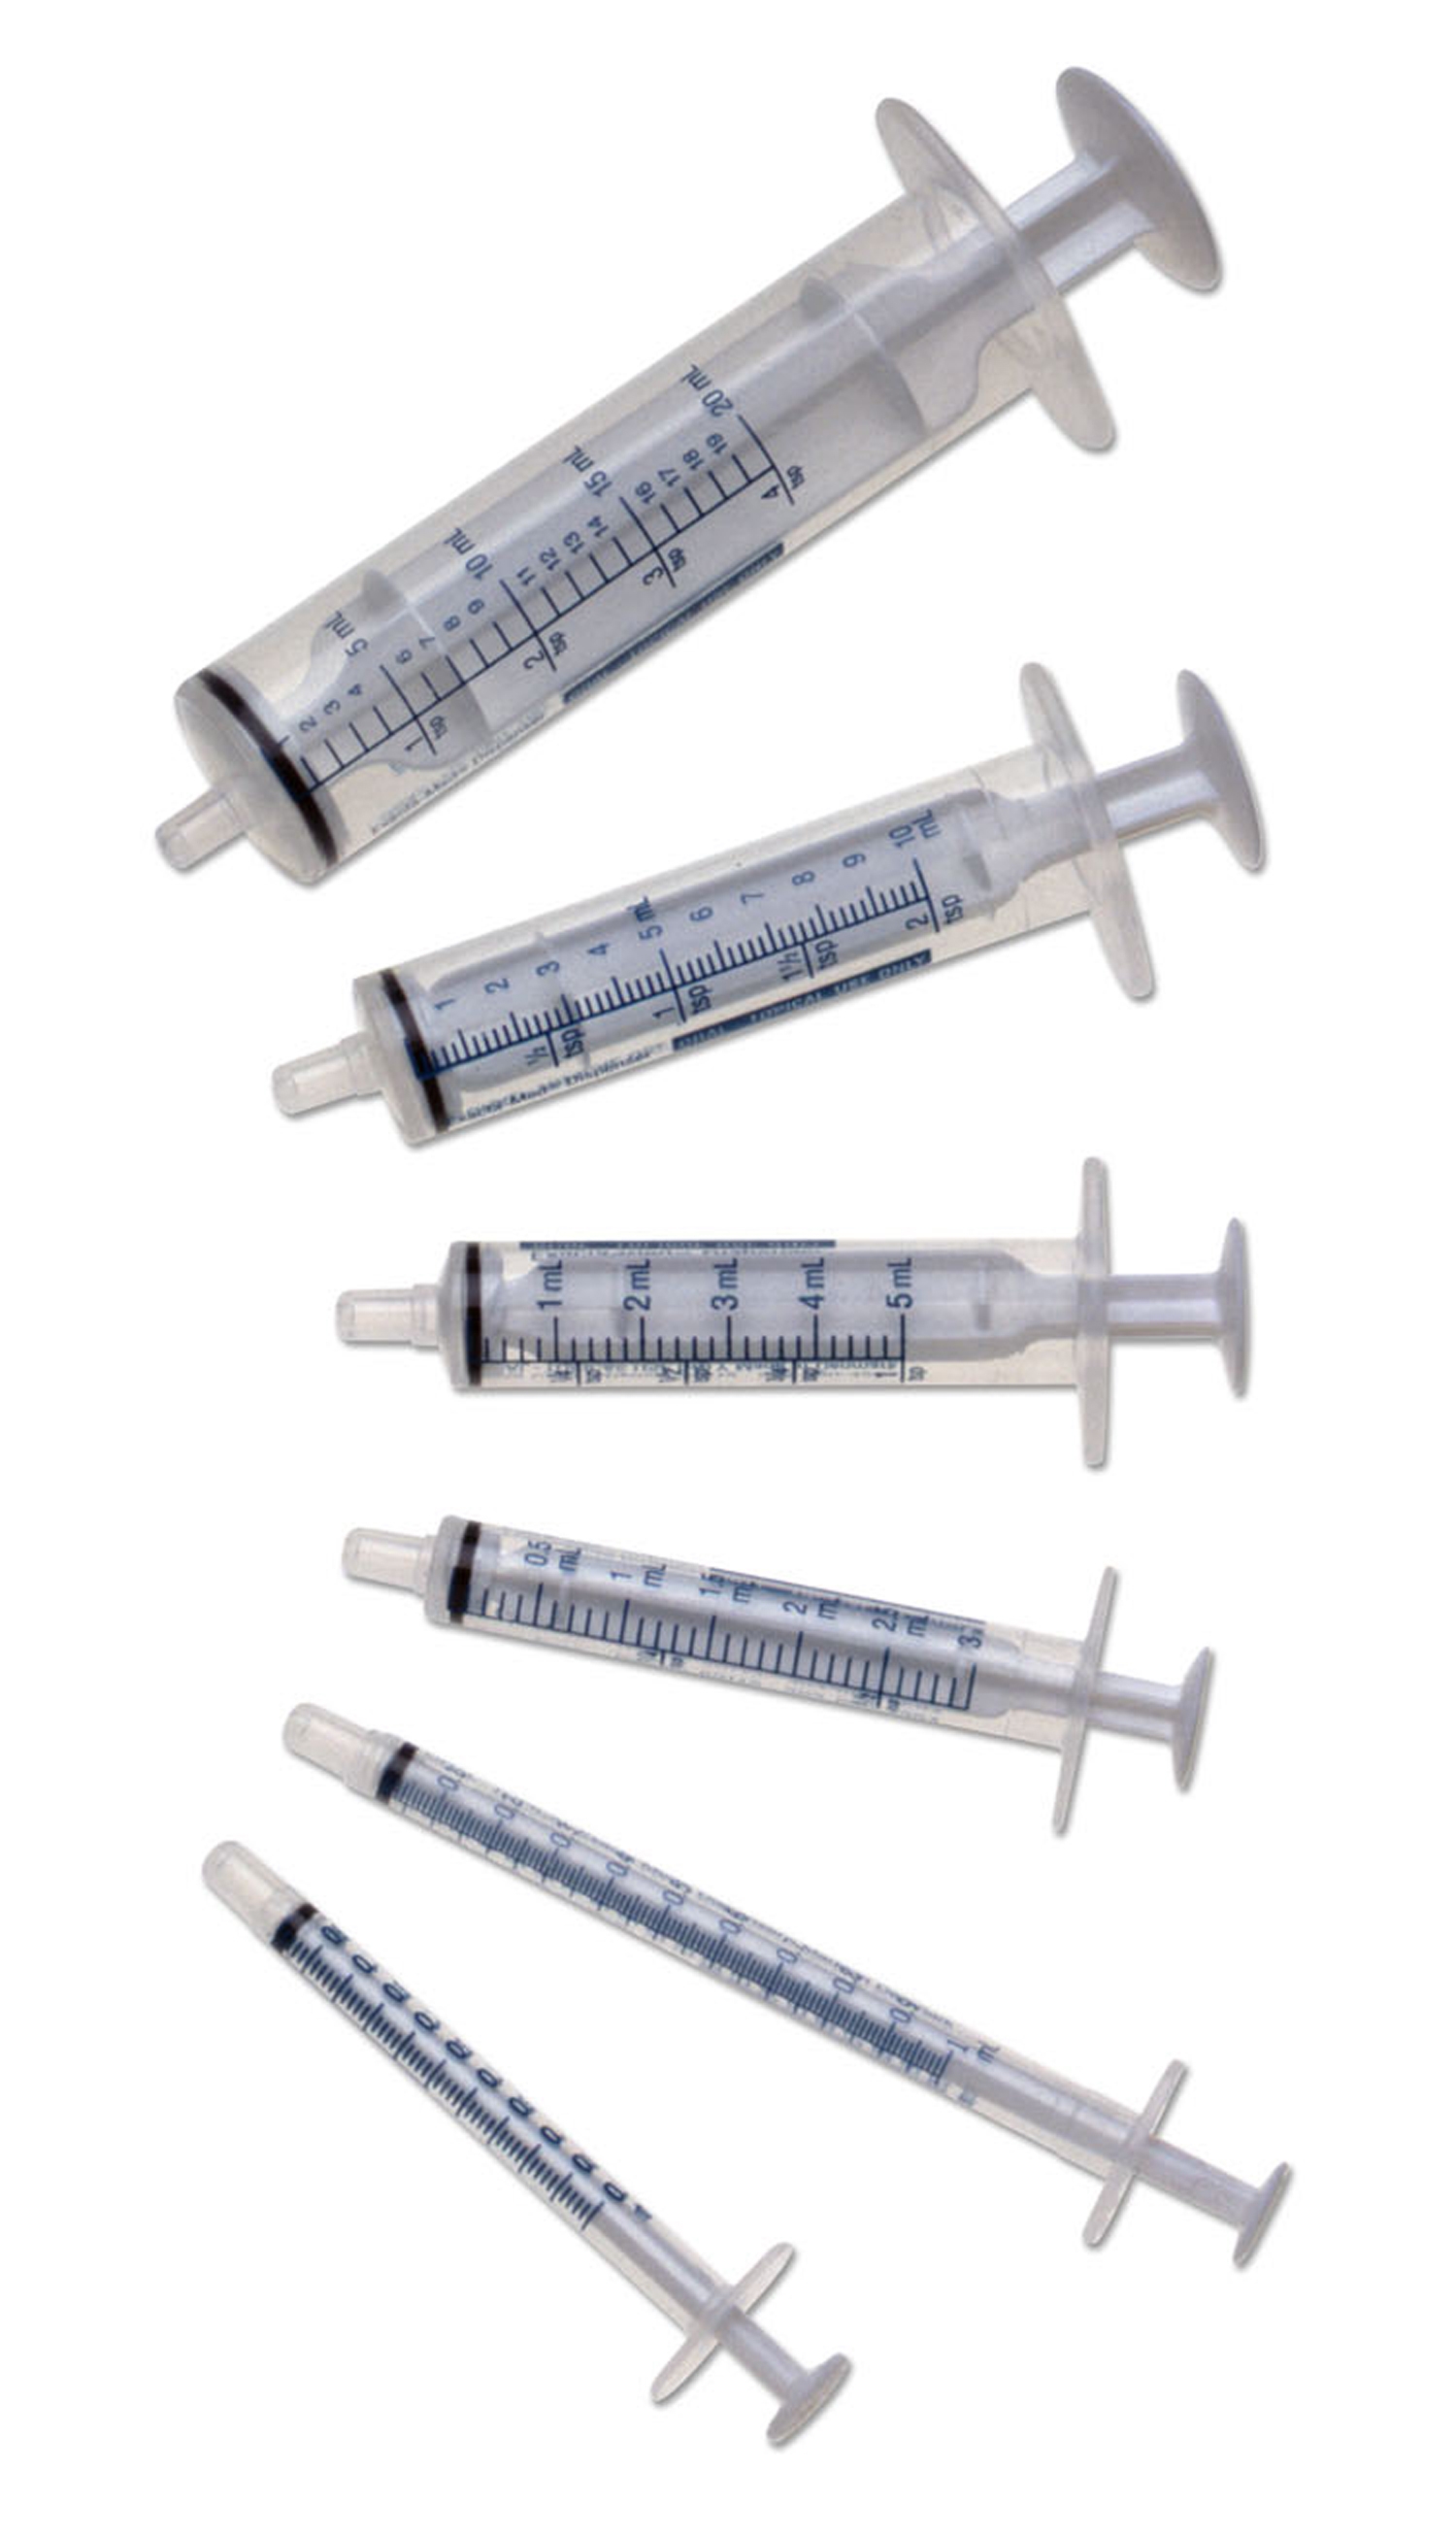 Exacta-Med® Oral Dispensers Eliminate Wrong-Route Errors And Inappropriate Clinical Line Connections Image